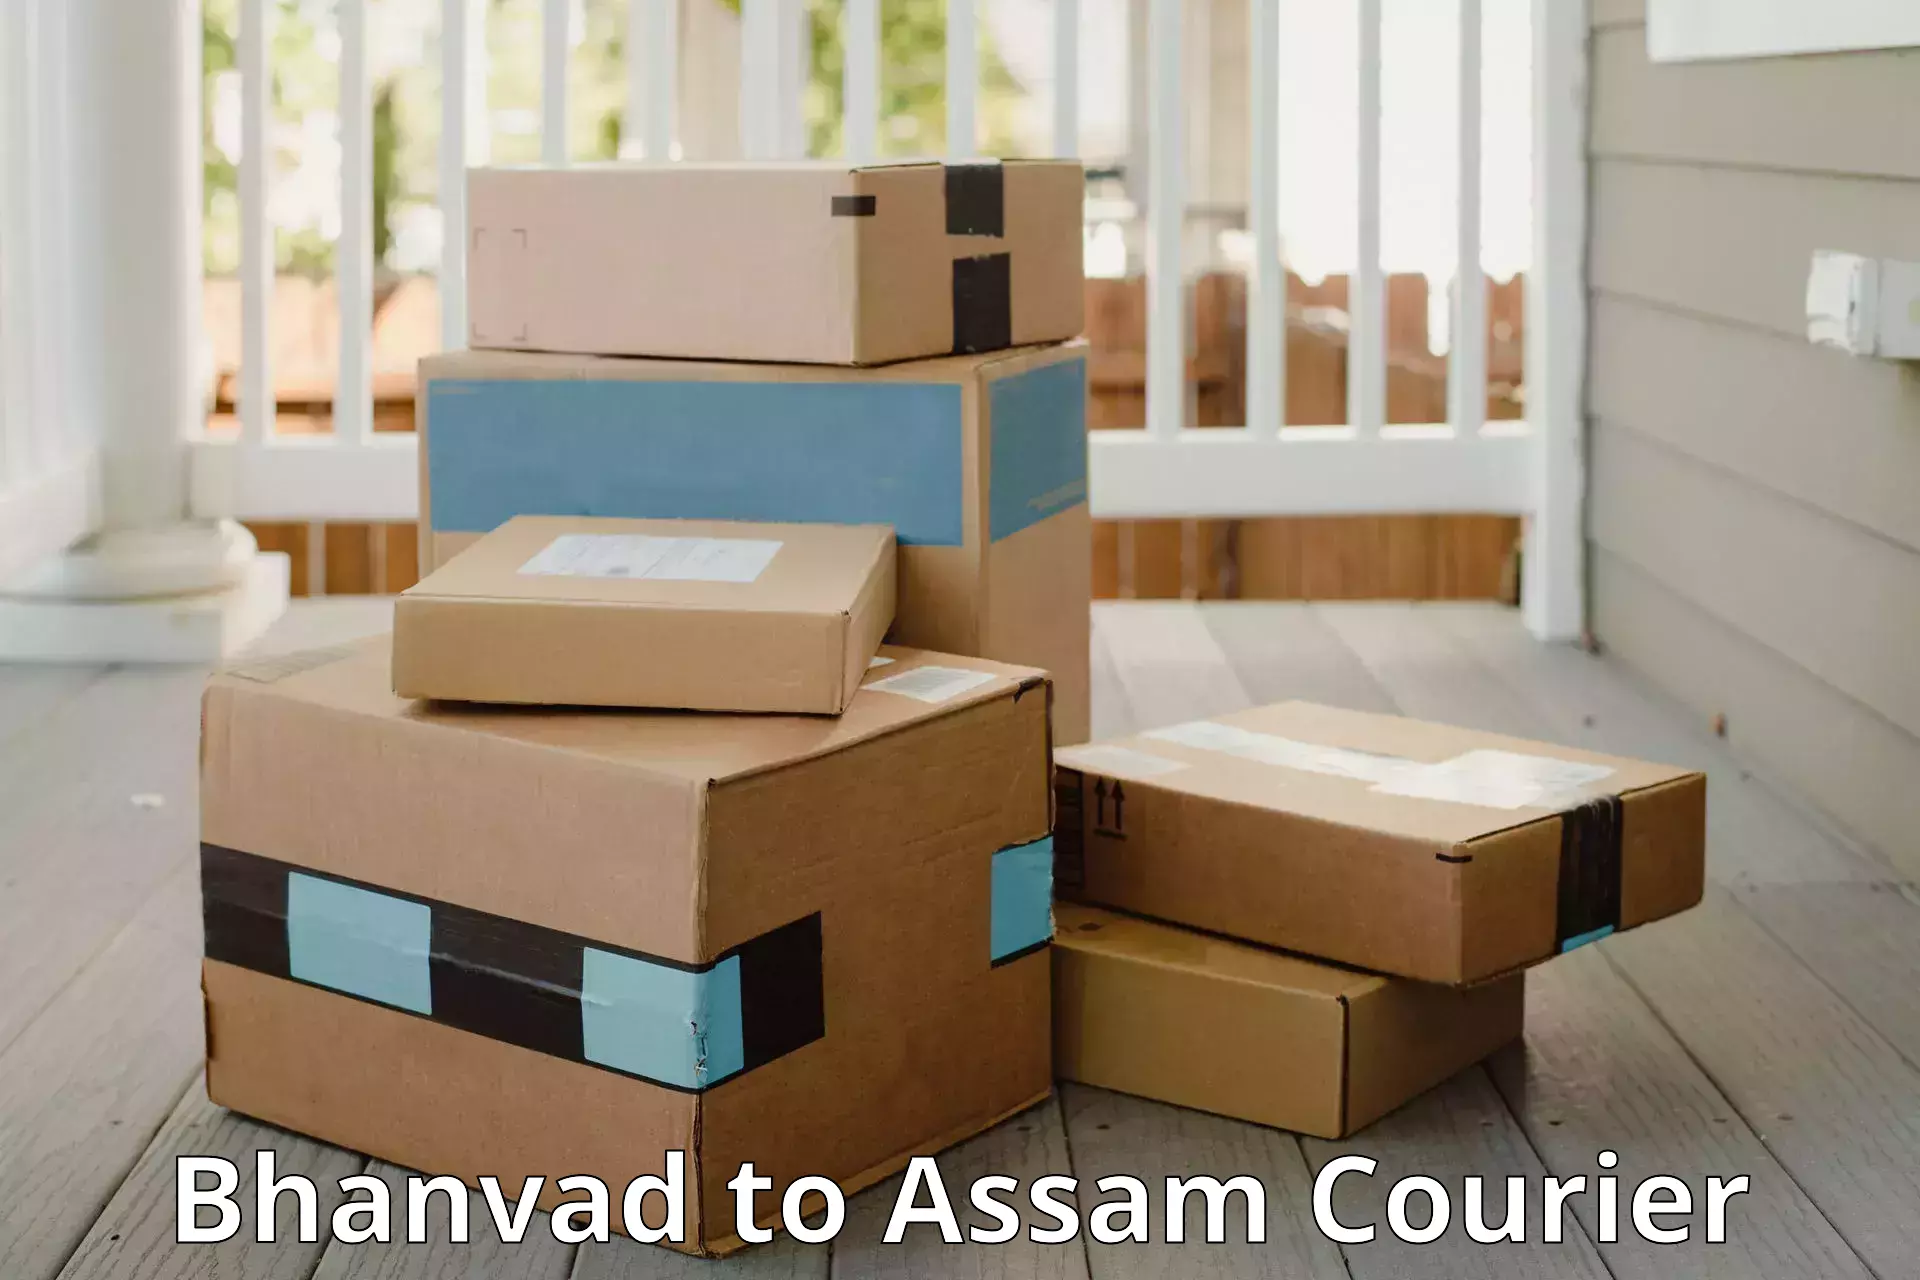 Luggage storage and delivery in Bhanvad to Assam